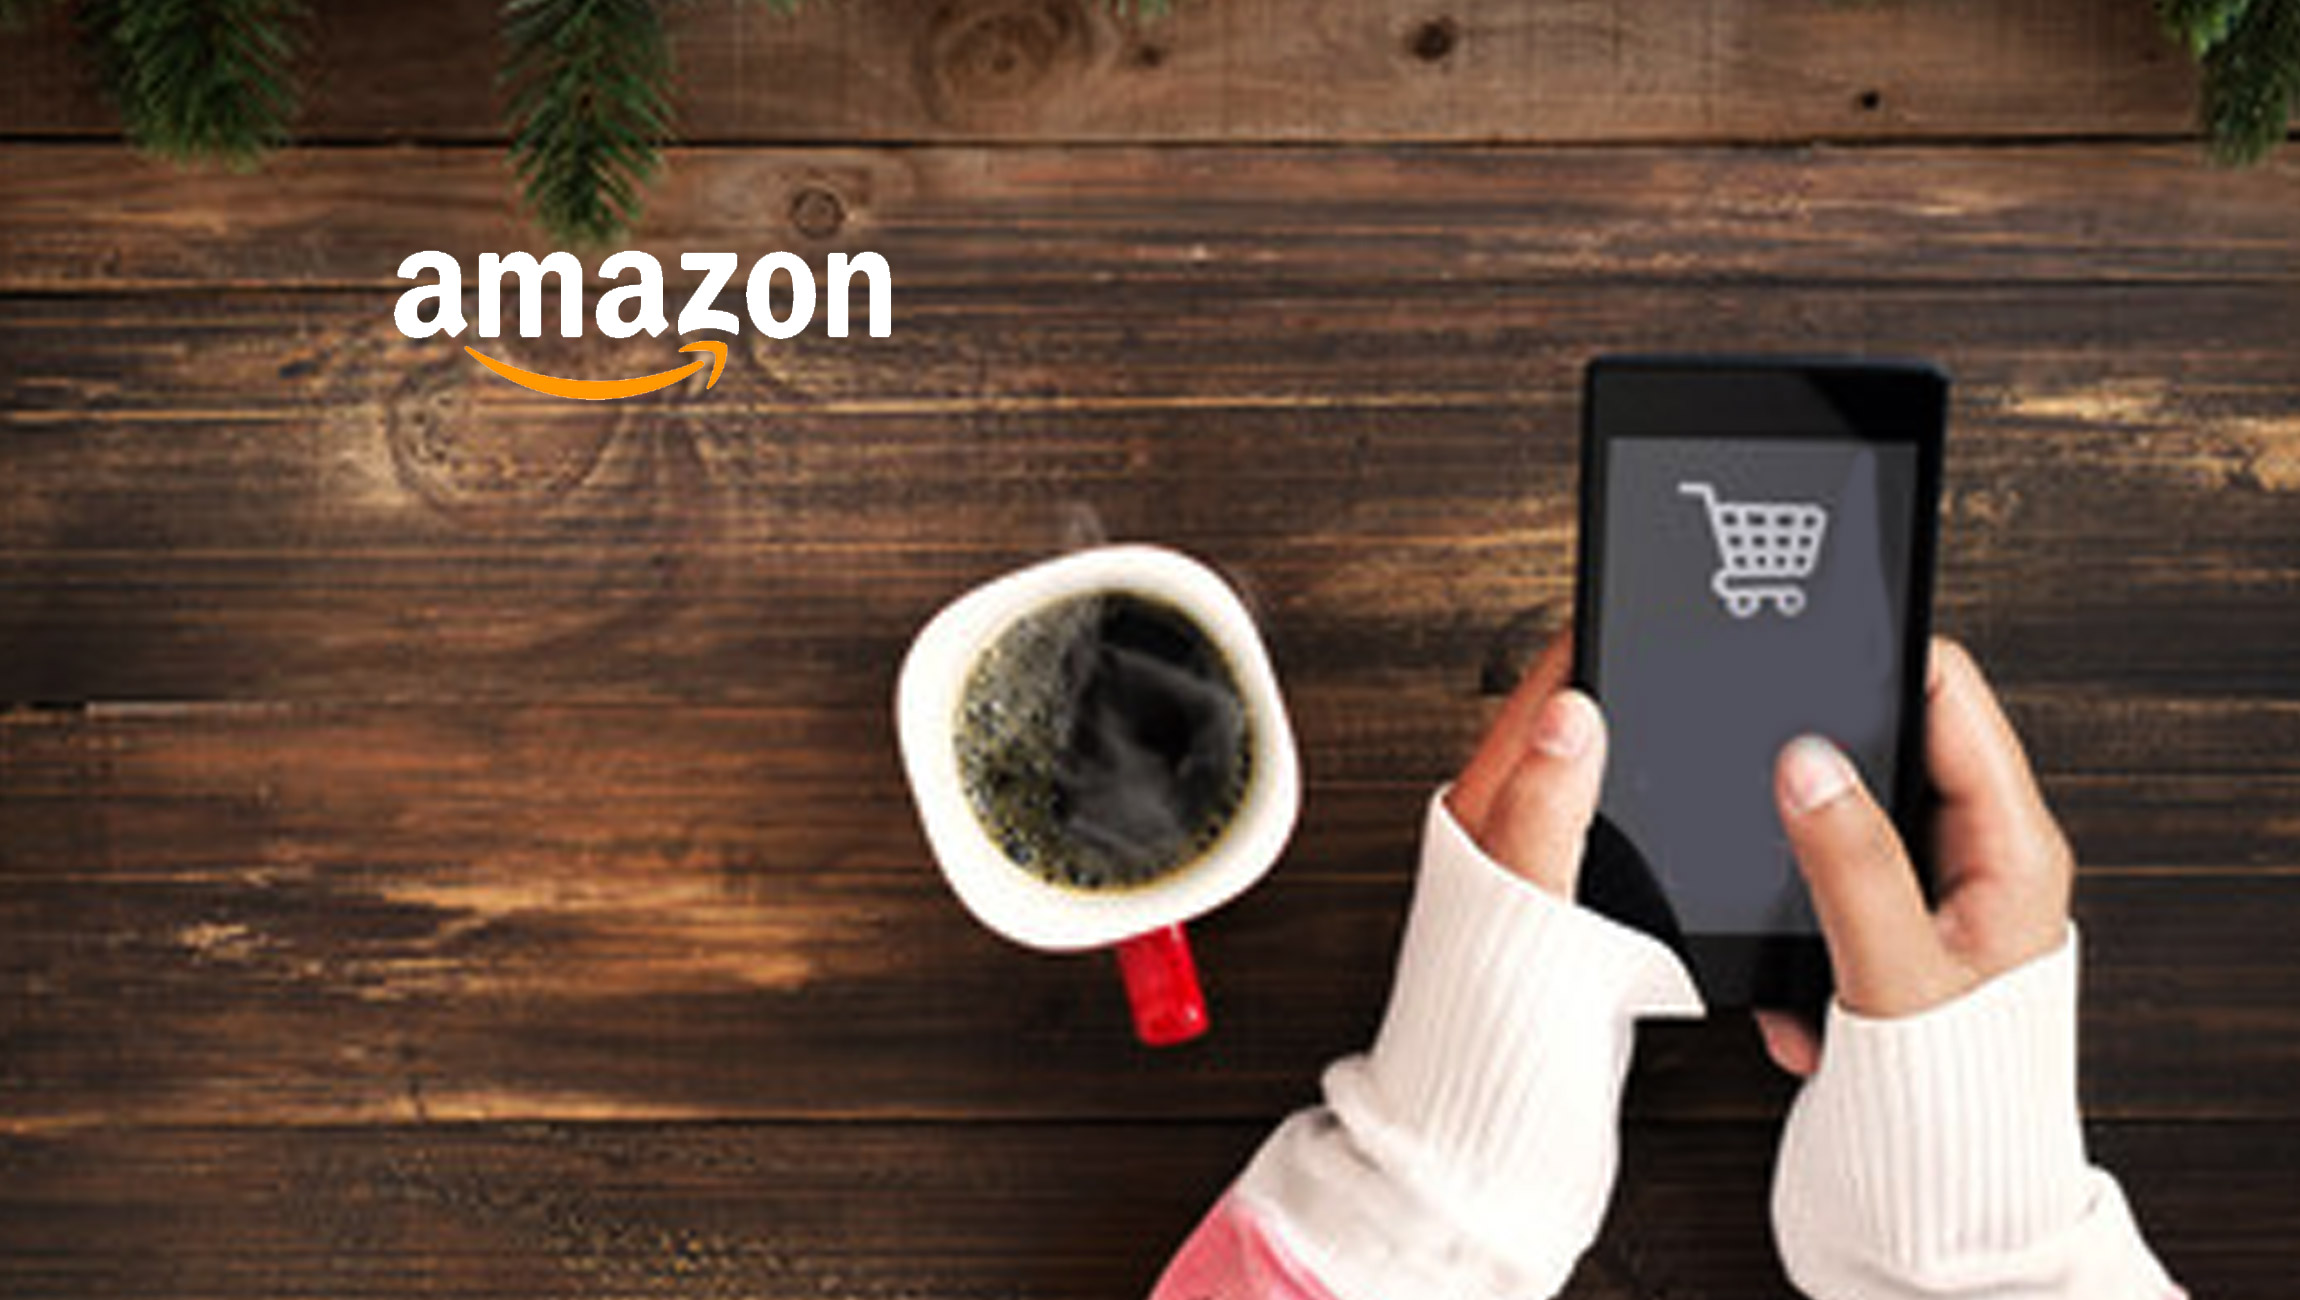 Amazon Announces Biggest Holiday Shopping Weekend Ever